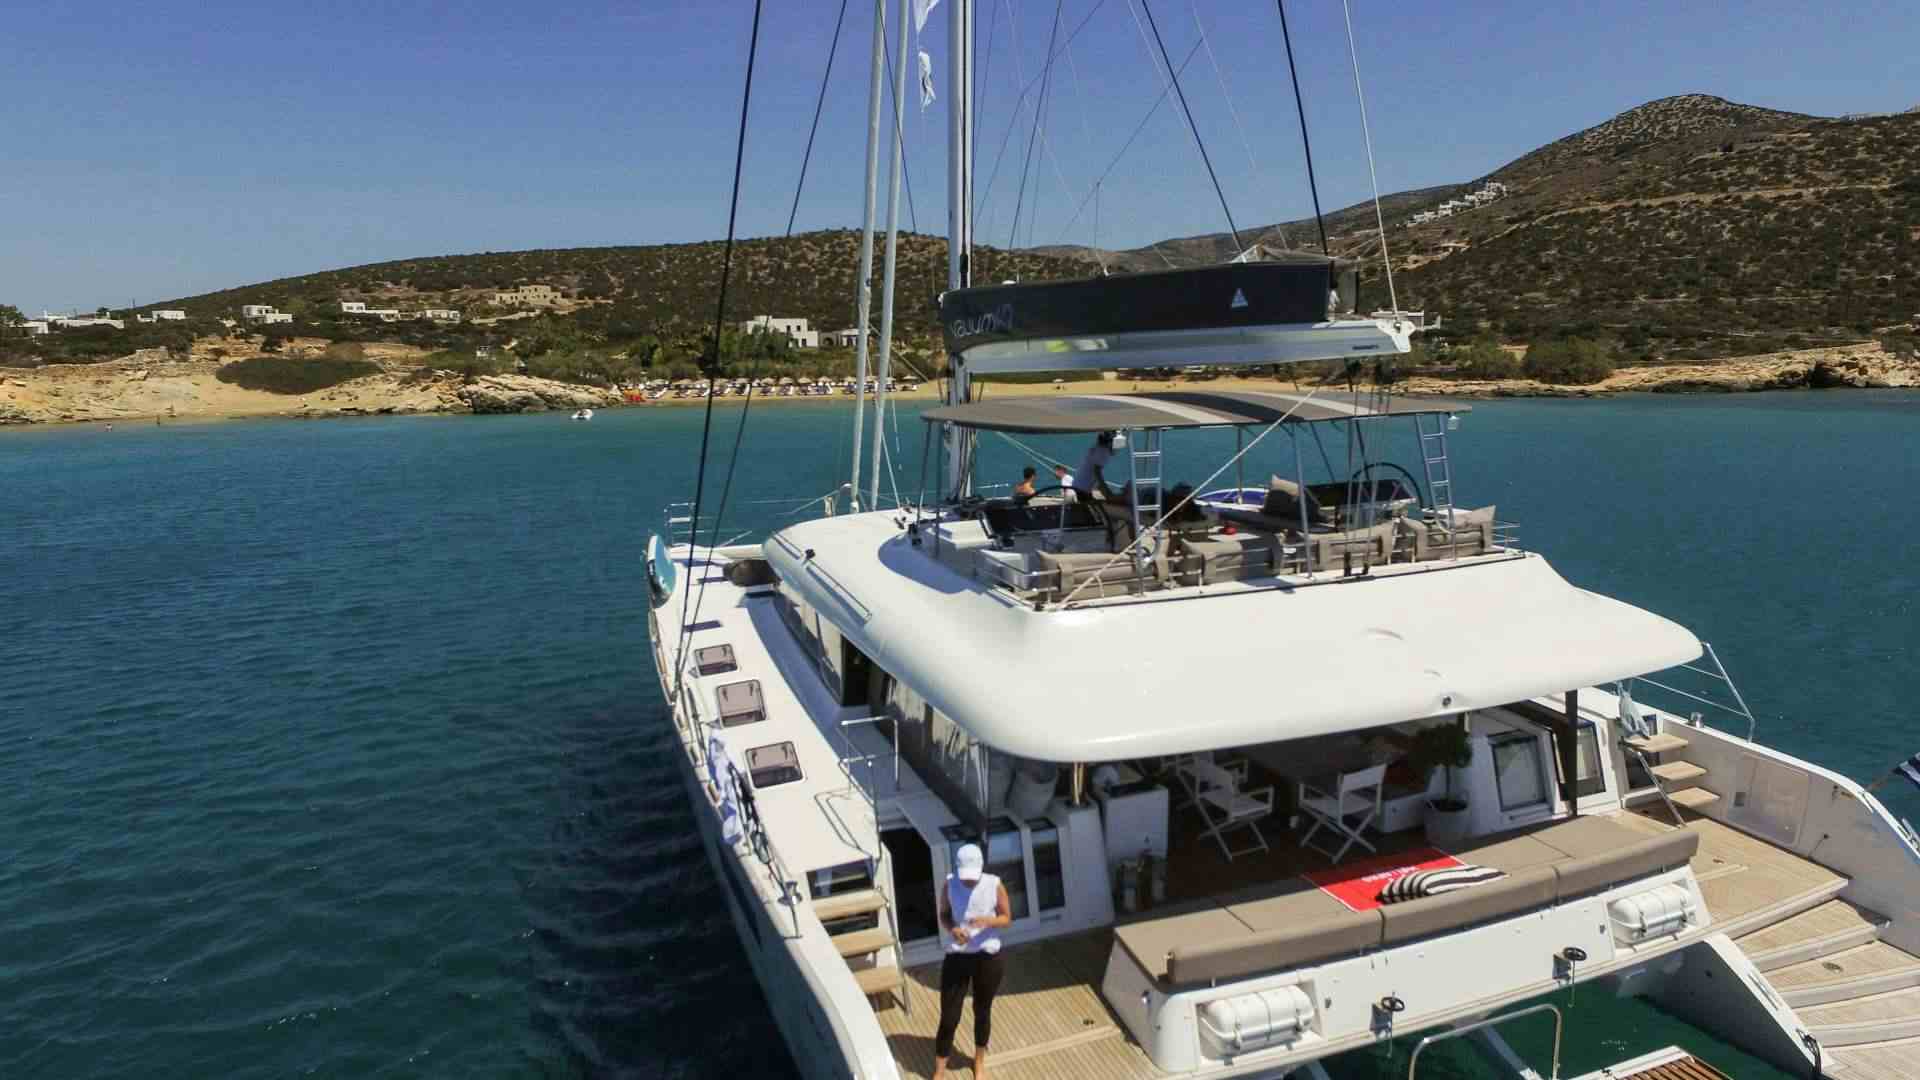 valium62 - Yacht Charter Agia Eufimia & Boat hire in Greece 1